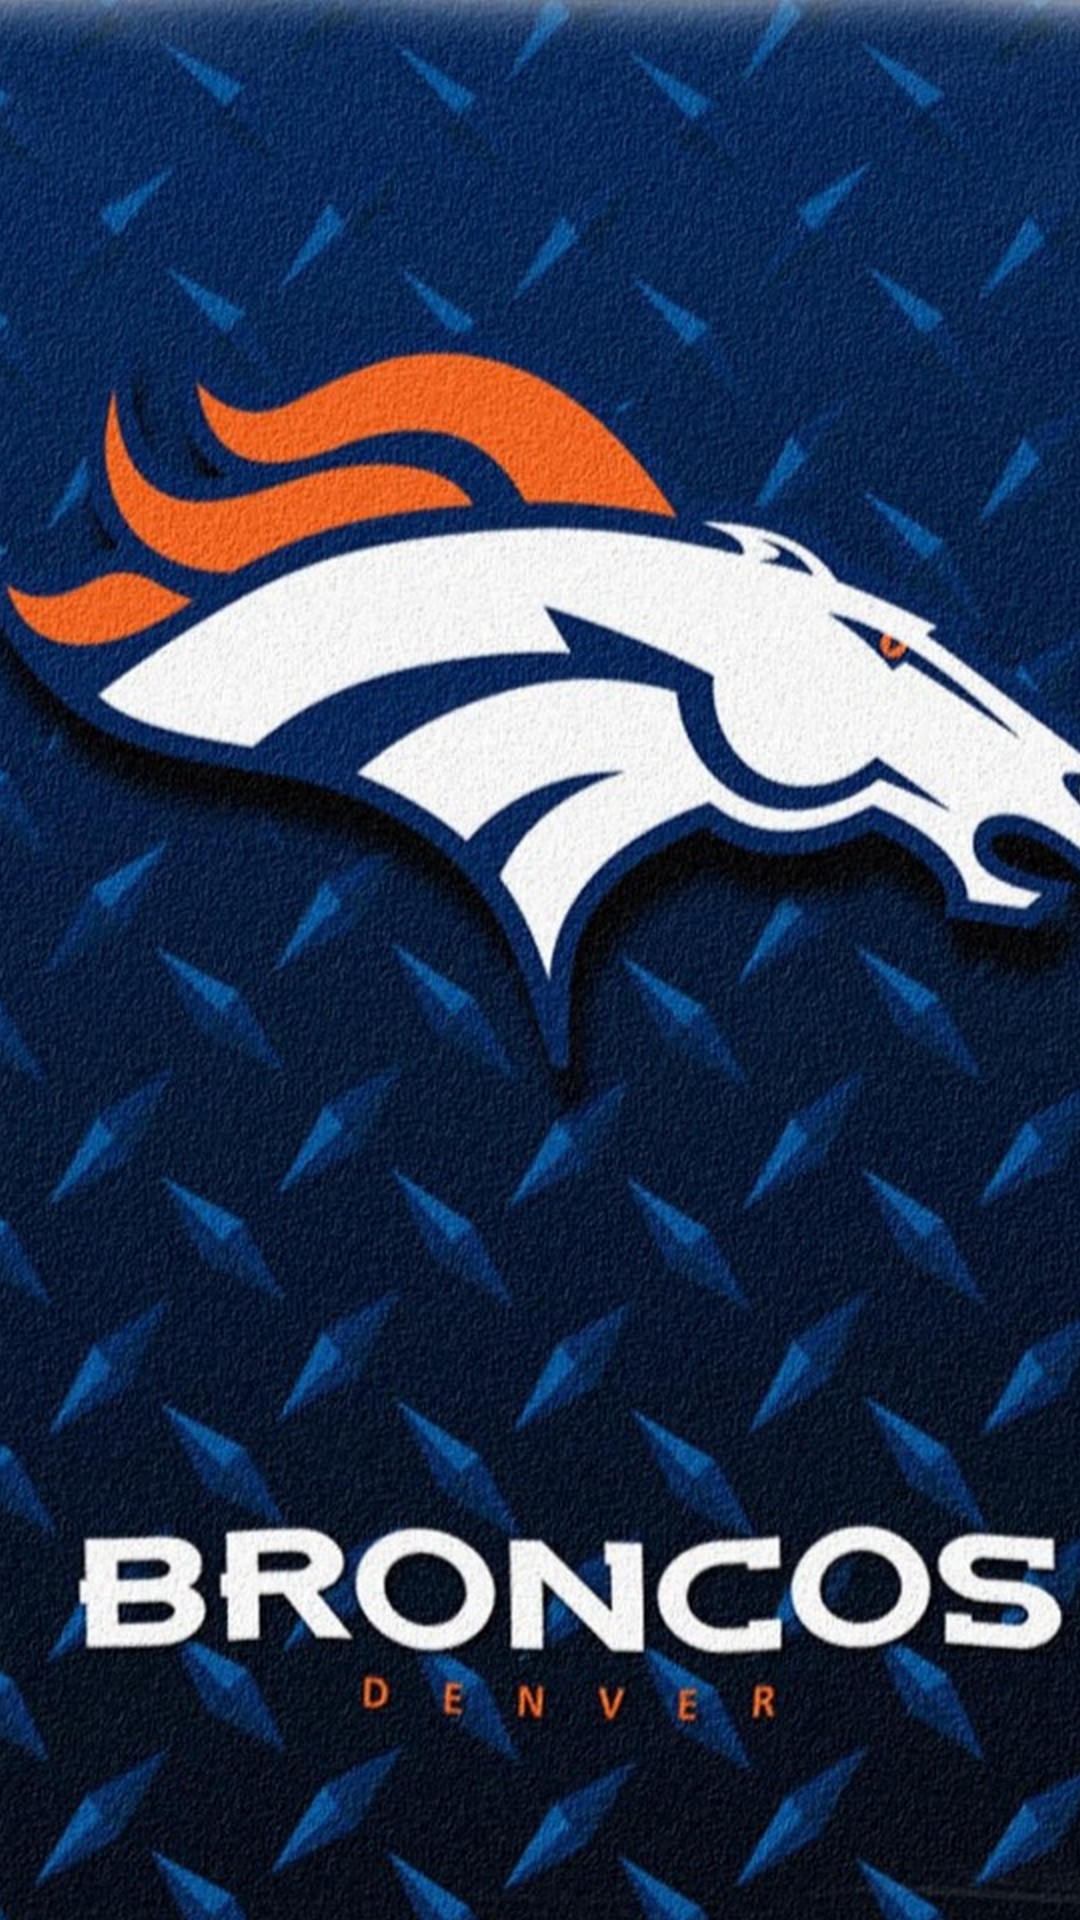 Denver Broncos iPhone Wallpaper Lock Screen with high-resolution 1080x1920 pixel. Download and set as wallpaper for Apple iPhone X, XS Max, XR, 8, 7, 6, SE, iPad, Android